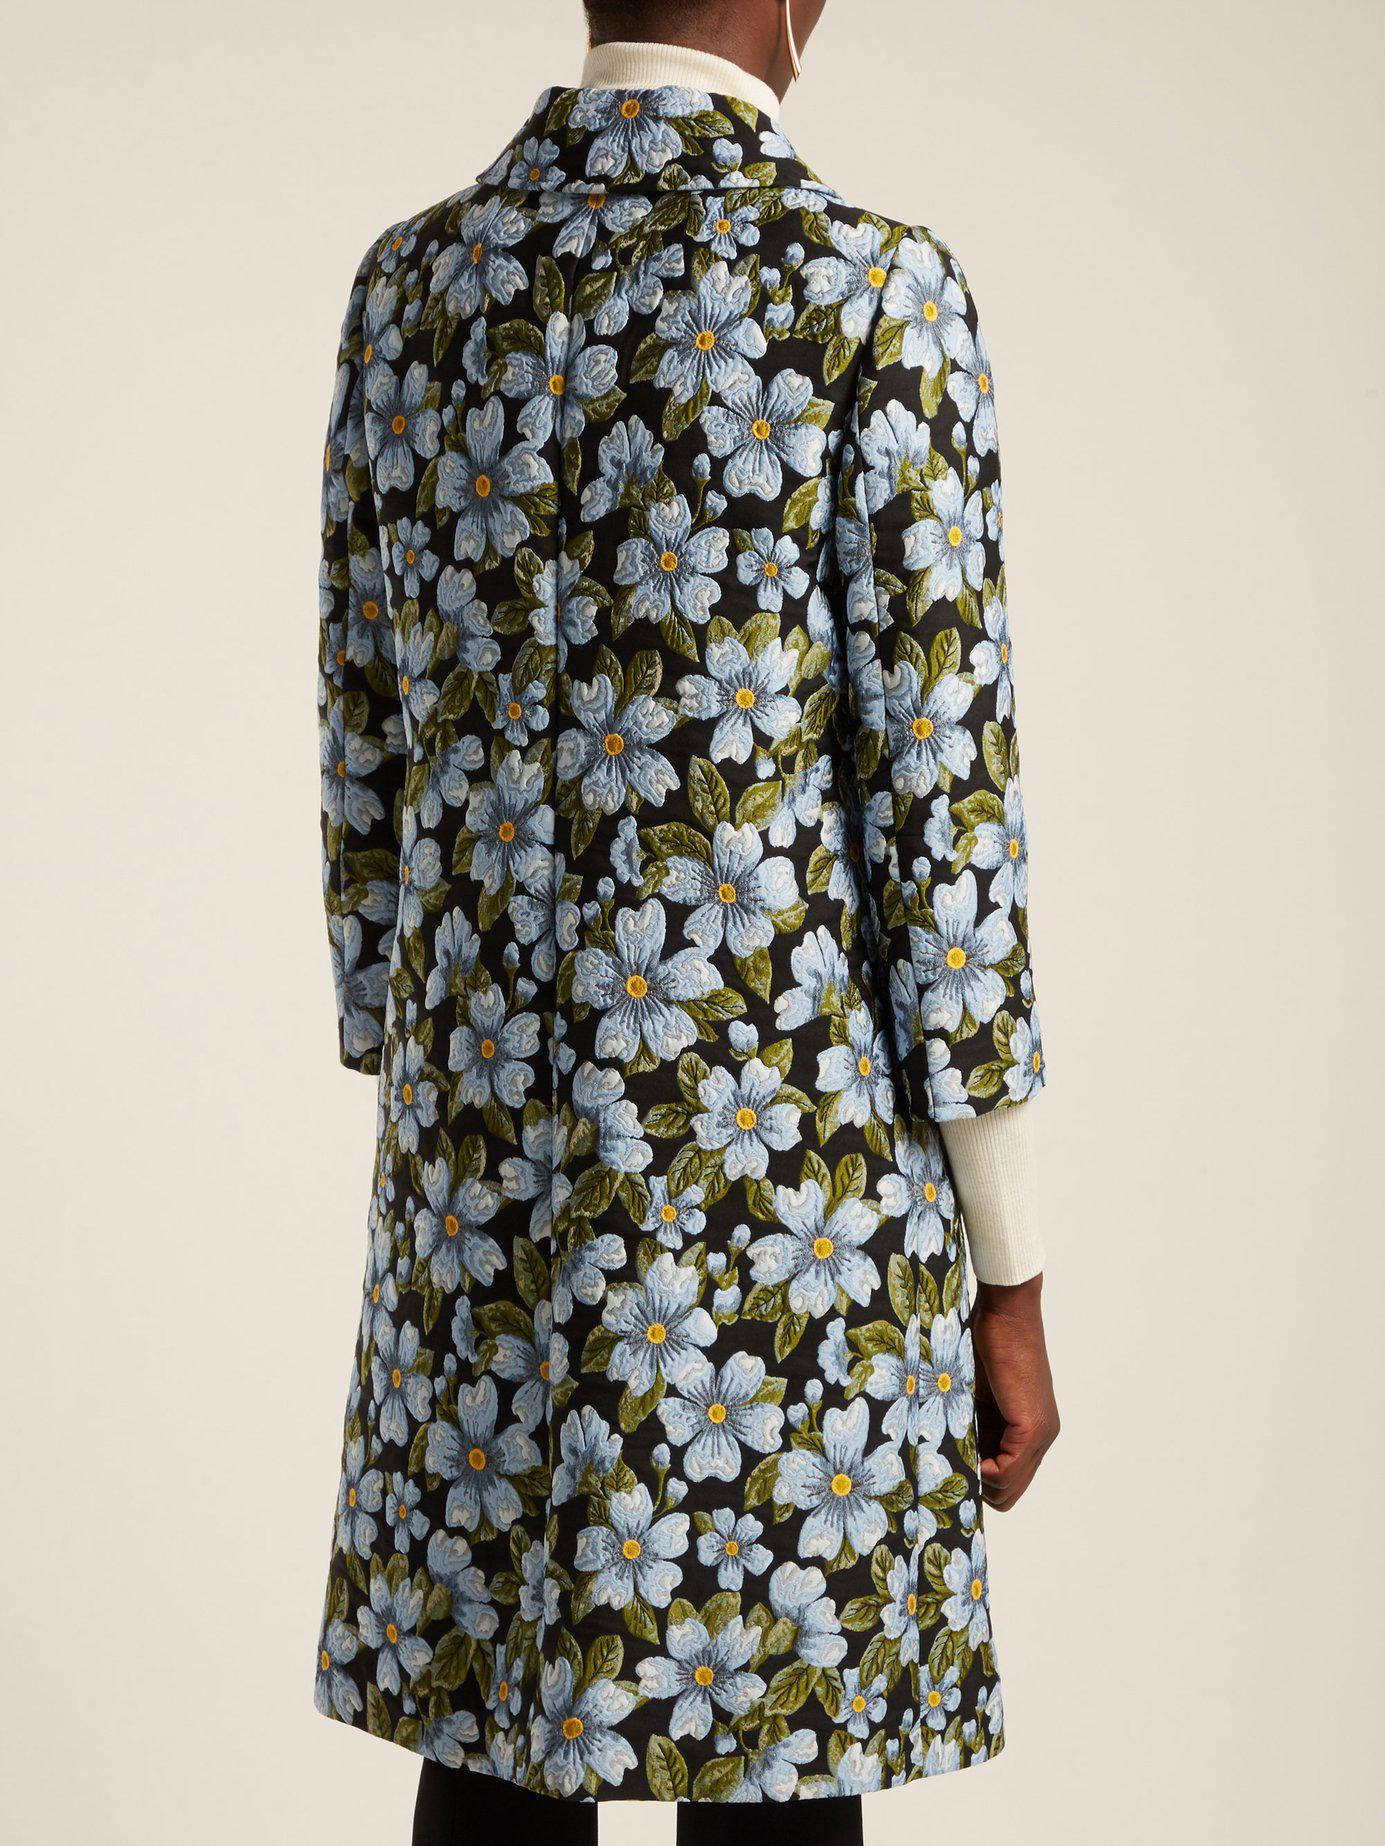 Dolce & Gabbana Single Breasted Floral Jacquard Coat in Blue | Lyst